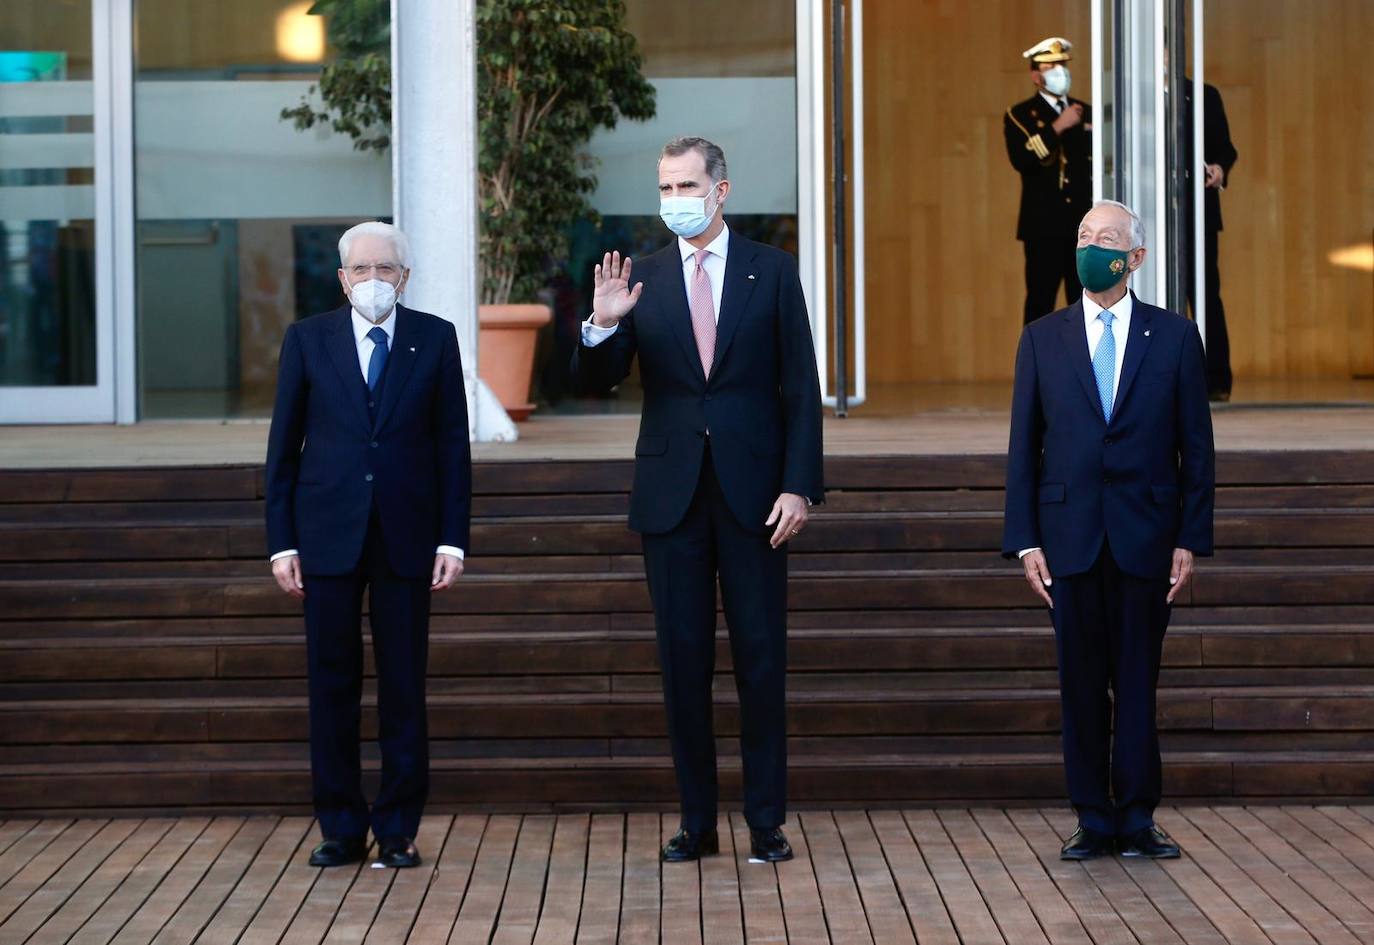 King Felipe attended the event alongside the presidents of Italy and Portugal.